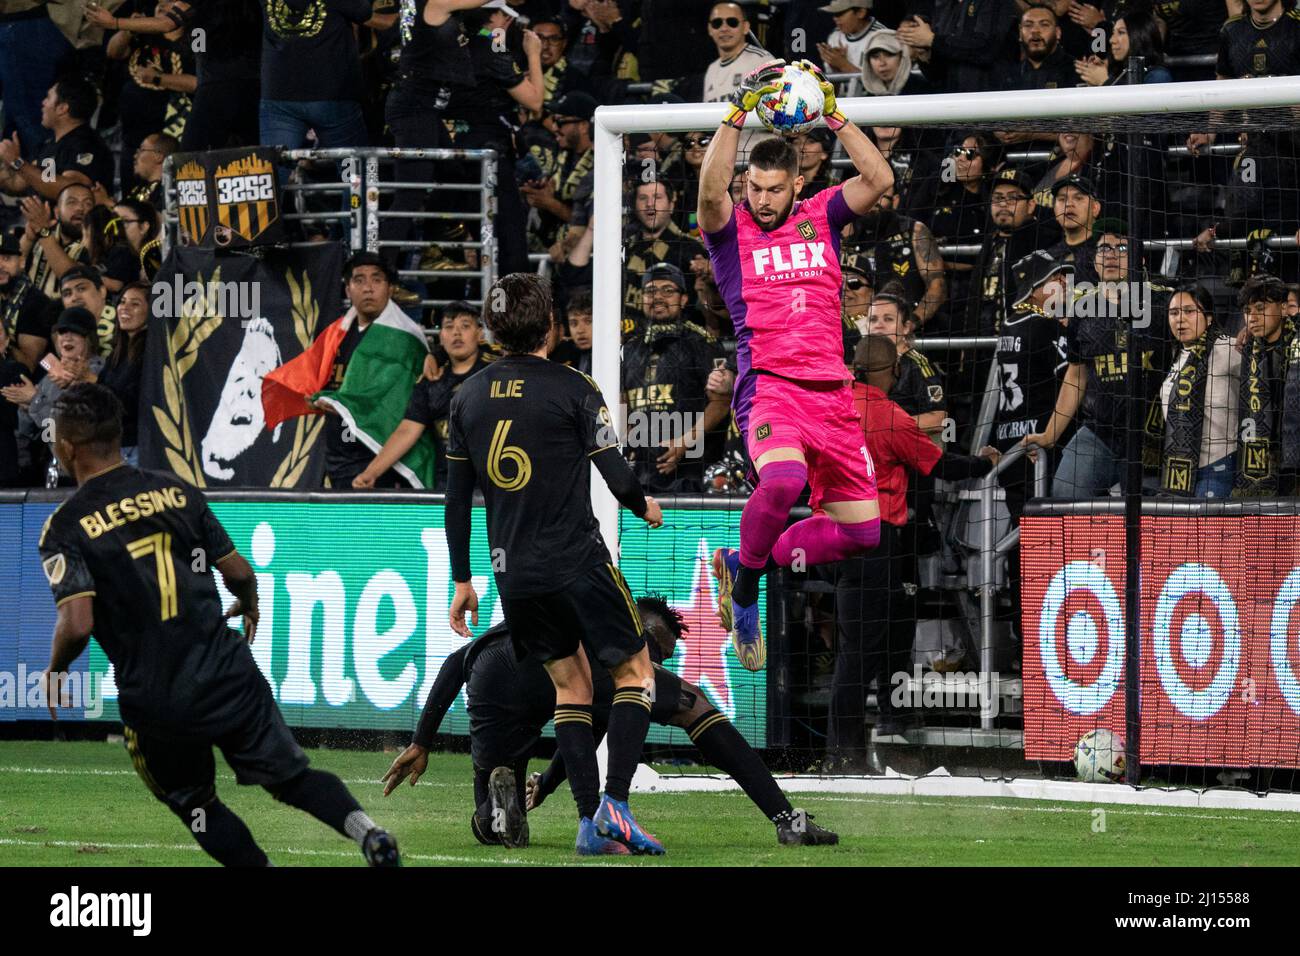 LAFC Acquires Goalkeeper Maxime Crépeau From Vancouver